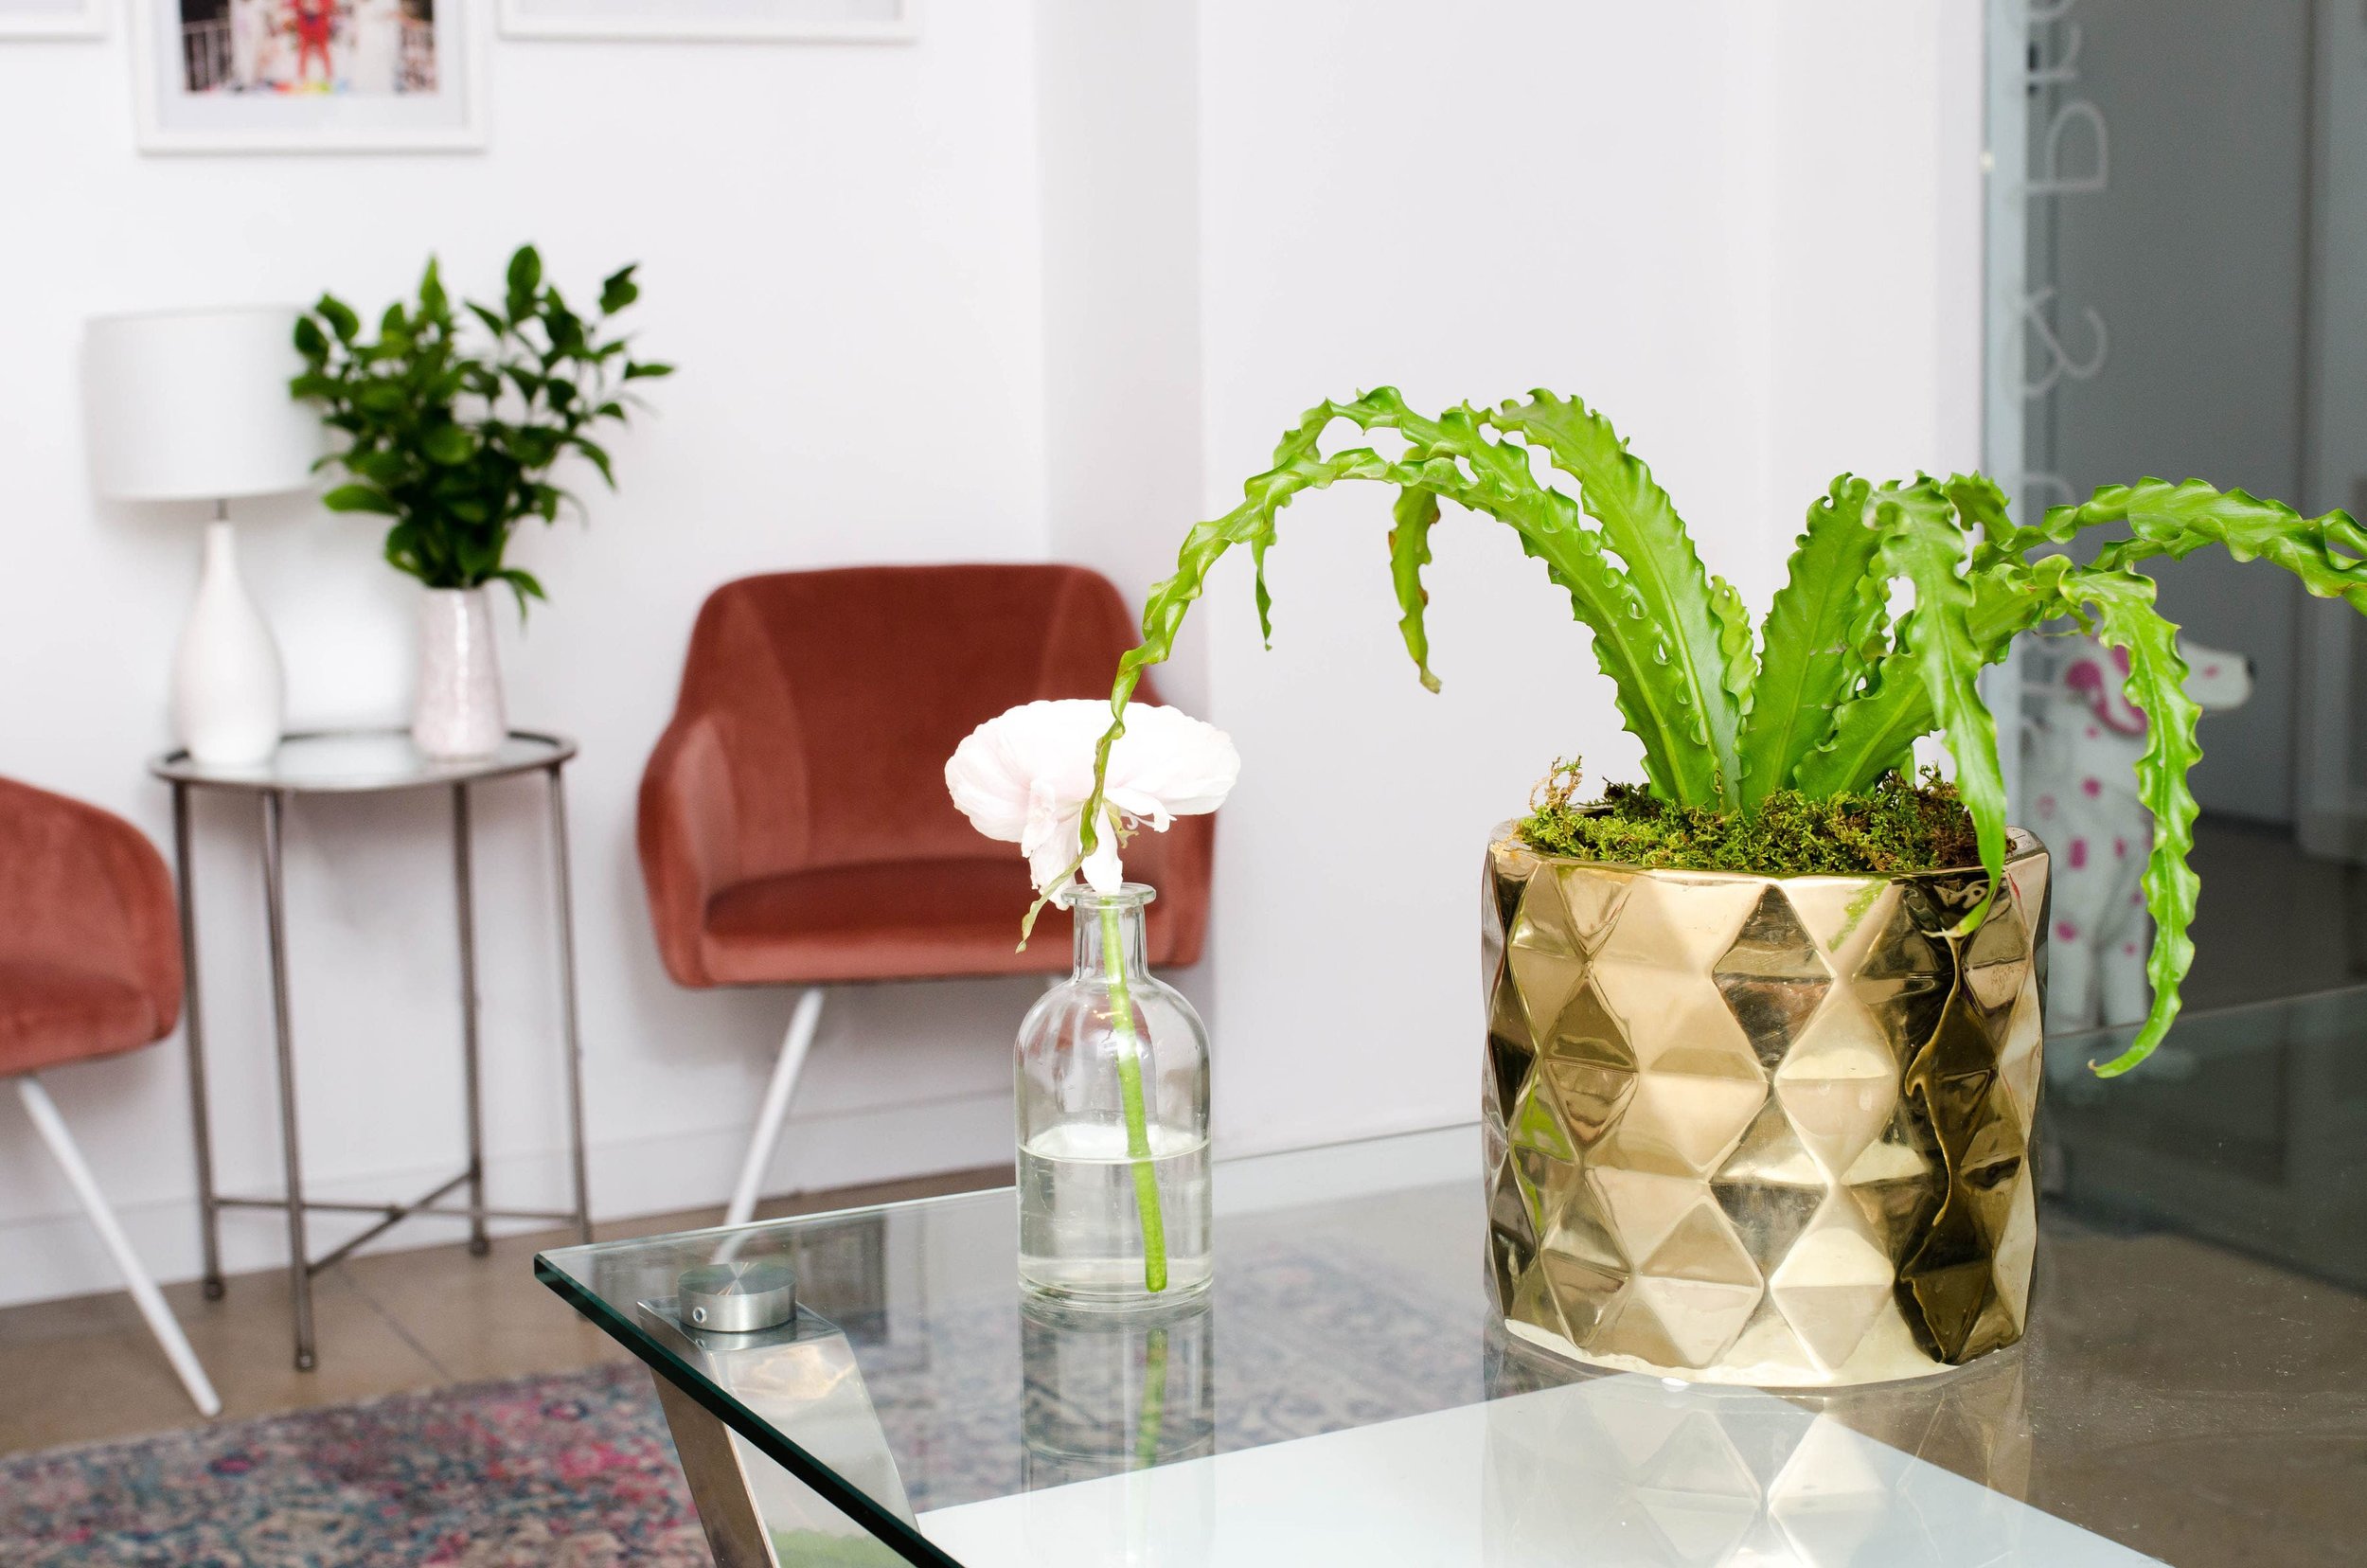 NEW - OFFICE - SPACE - MANHATTAN - COOL - OPEN - RECEPTION - PLANTS - B FLORAL